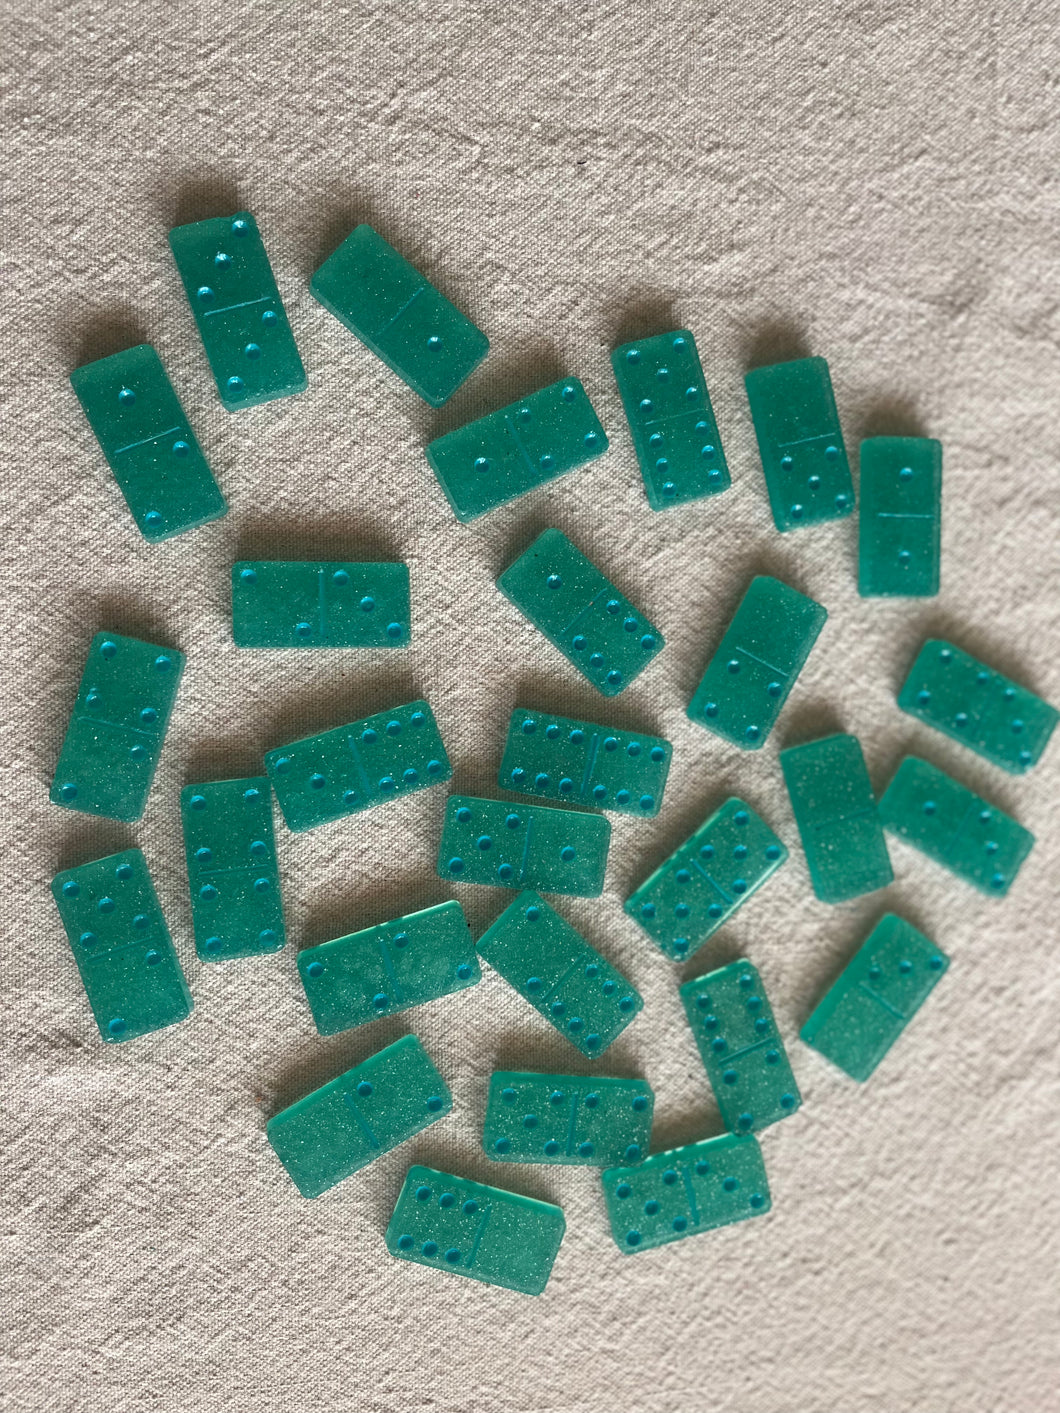 Colored dominoes set